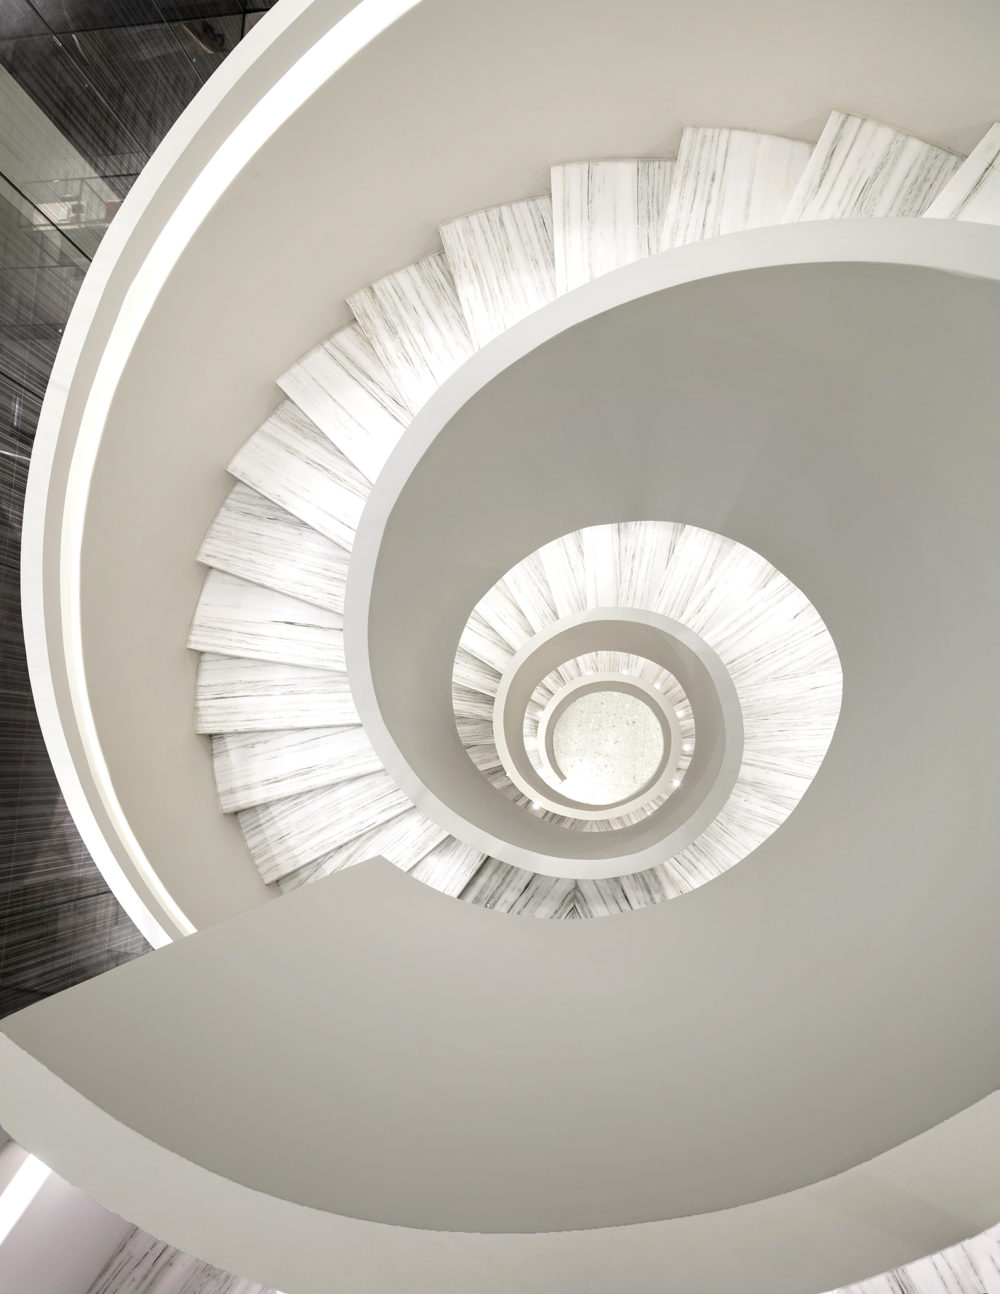 7-Barneys NY Downtown_Staircase